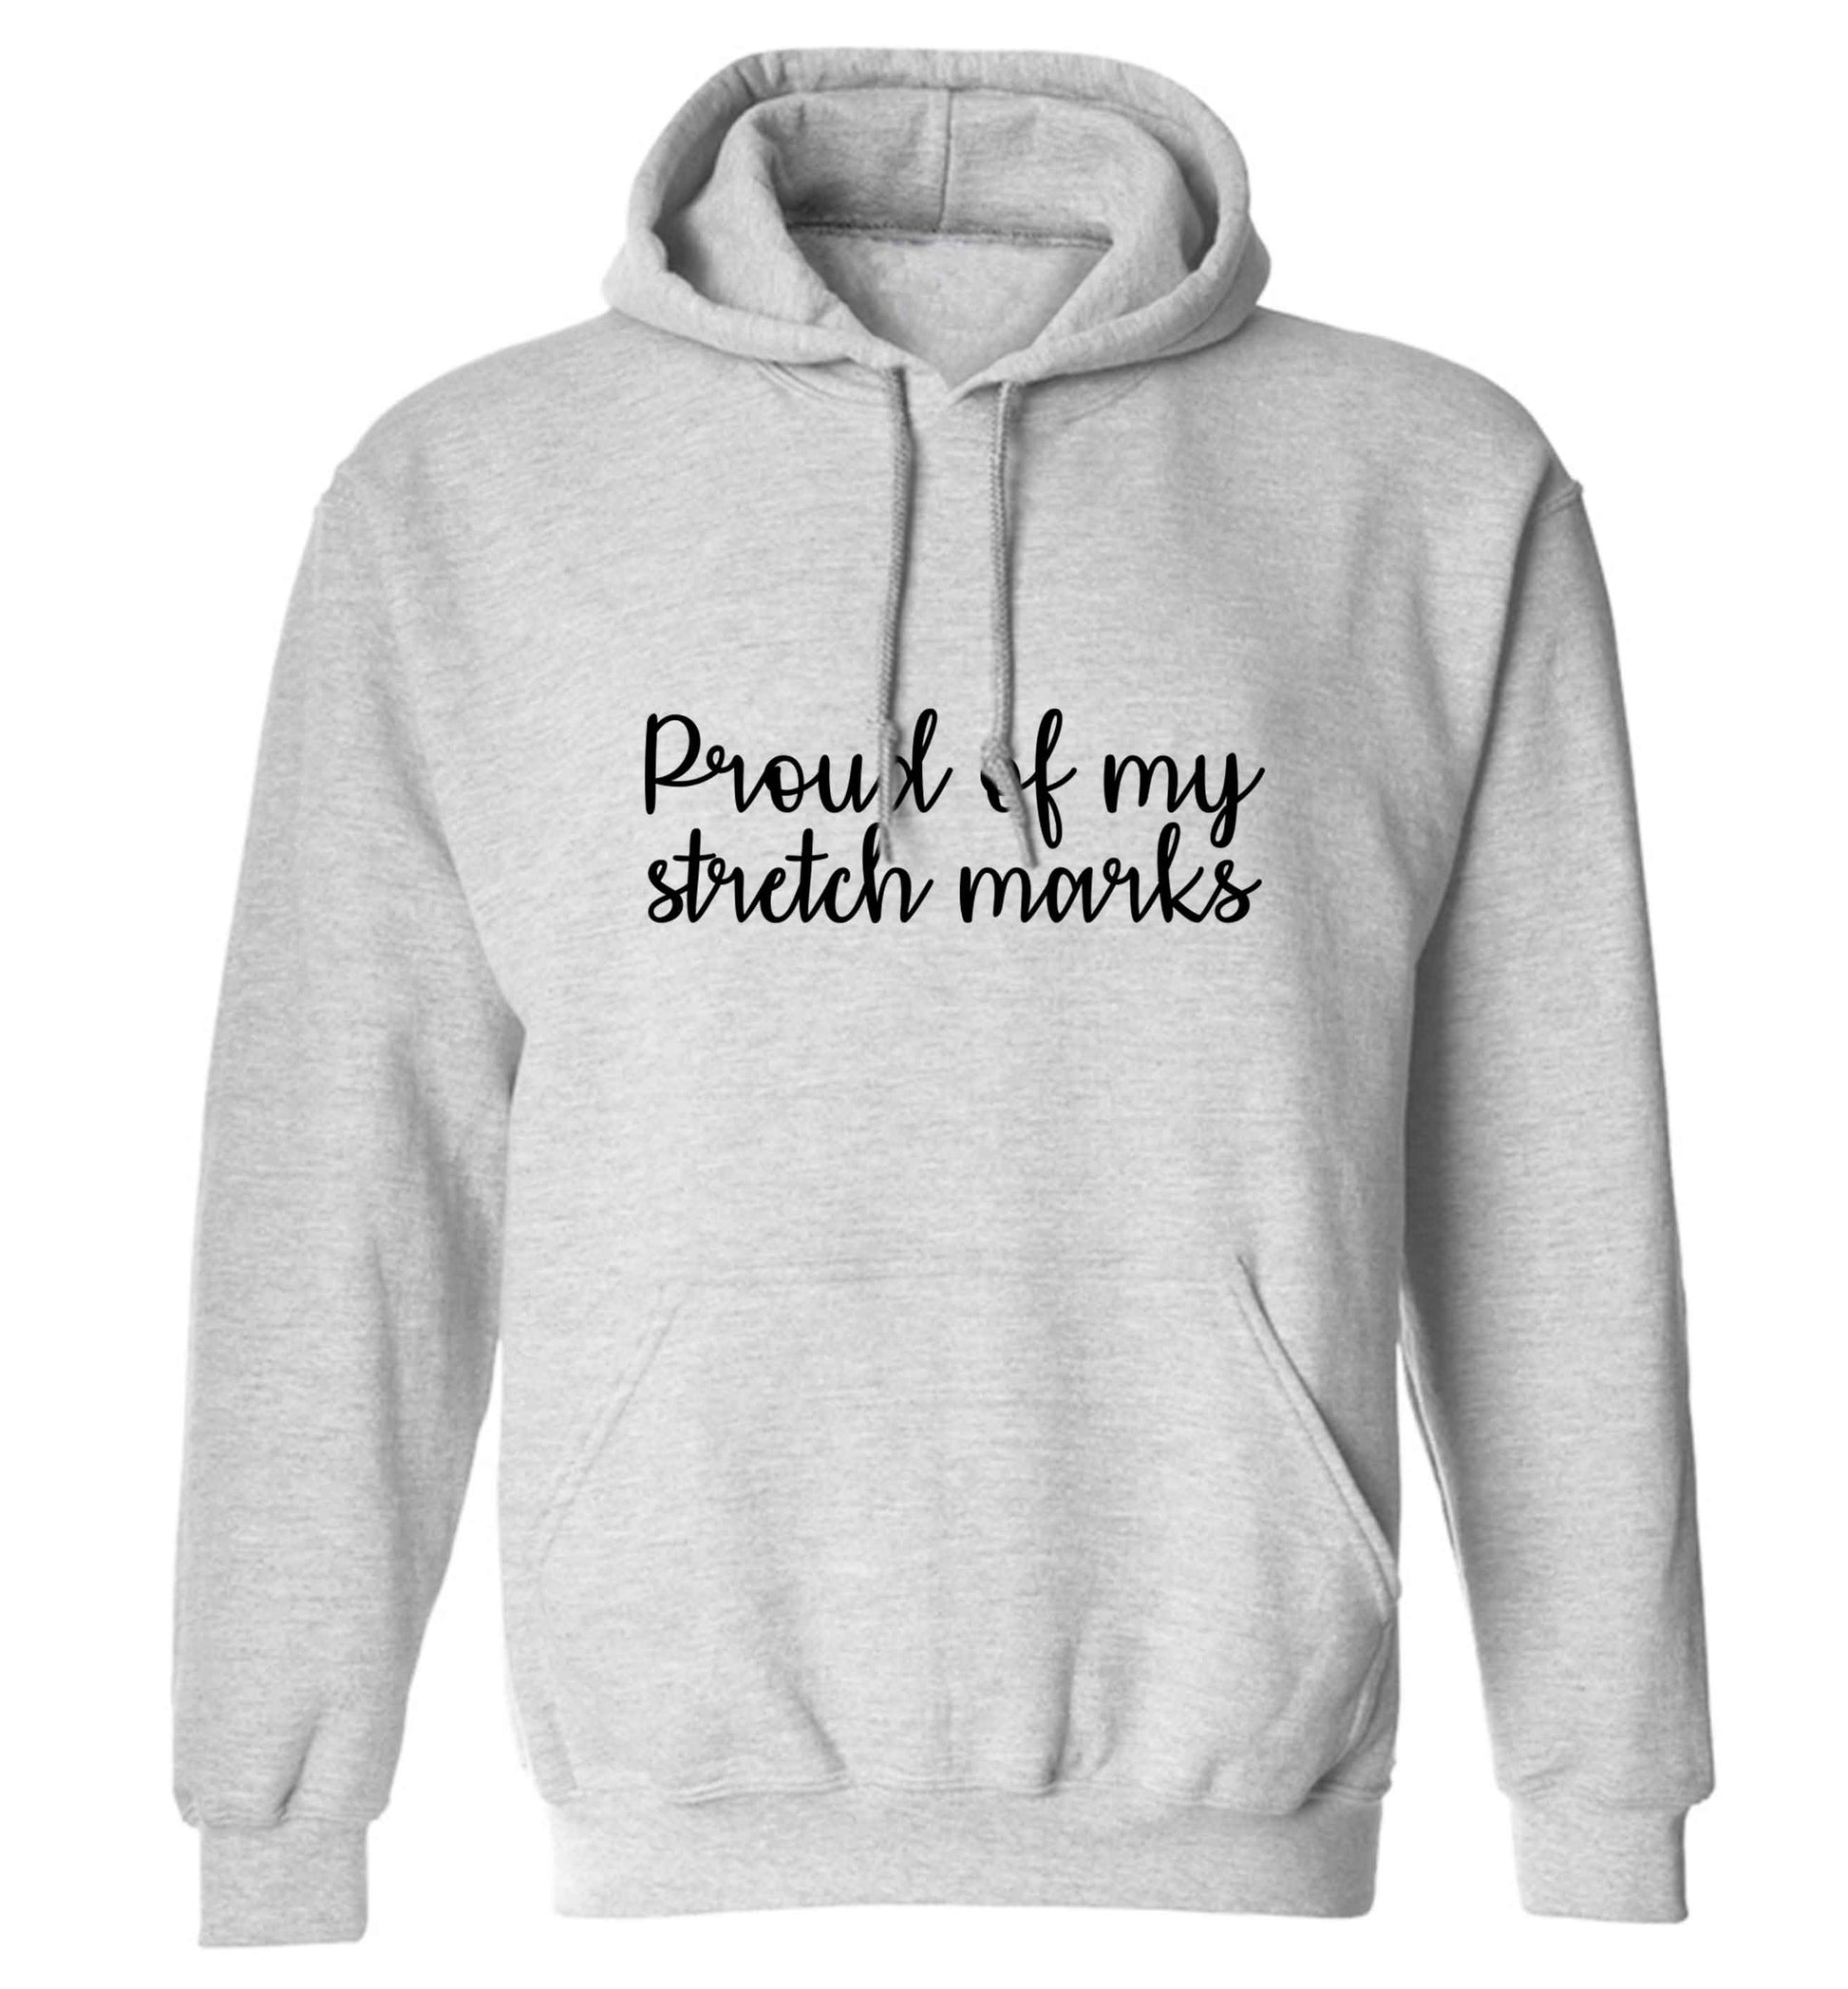 Proud of my stretch marks adults unisex grey hoodie 2XL